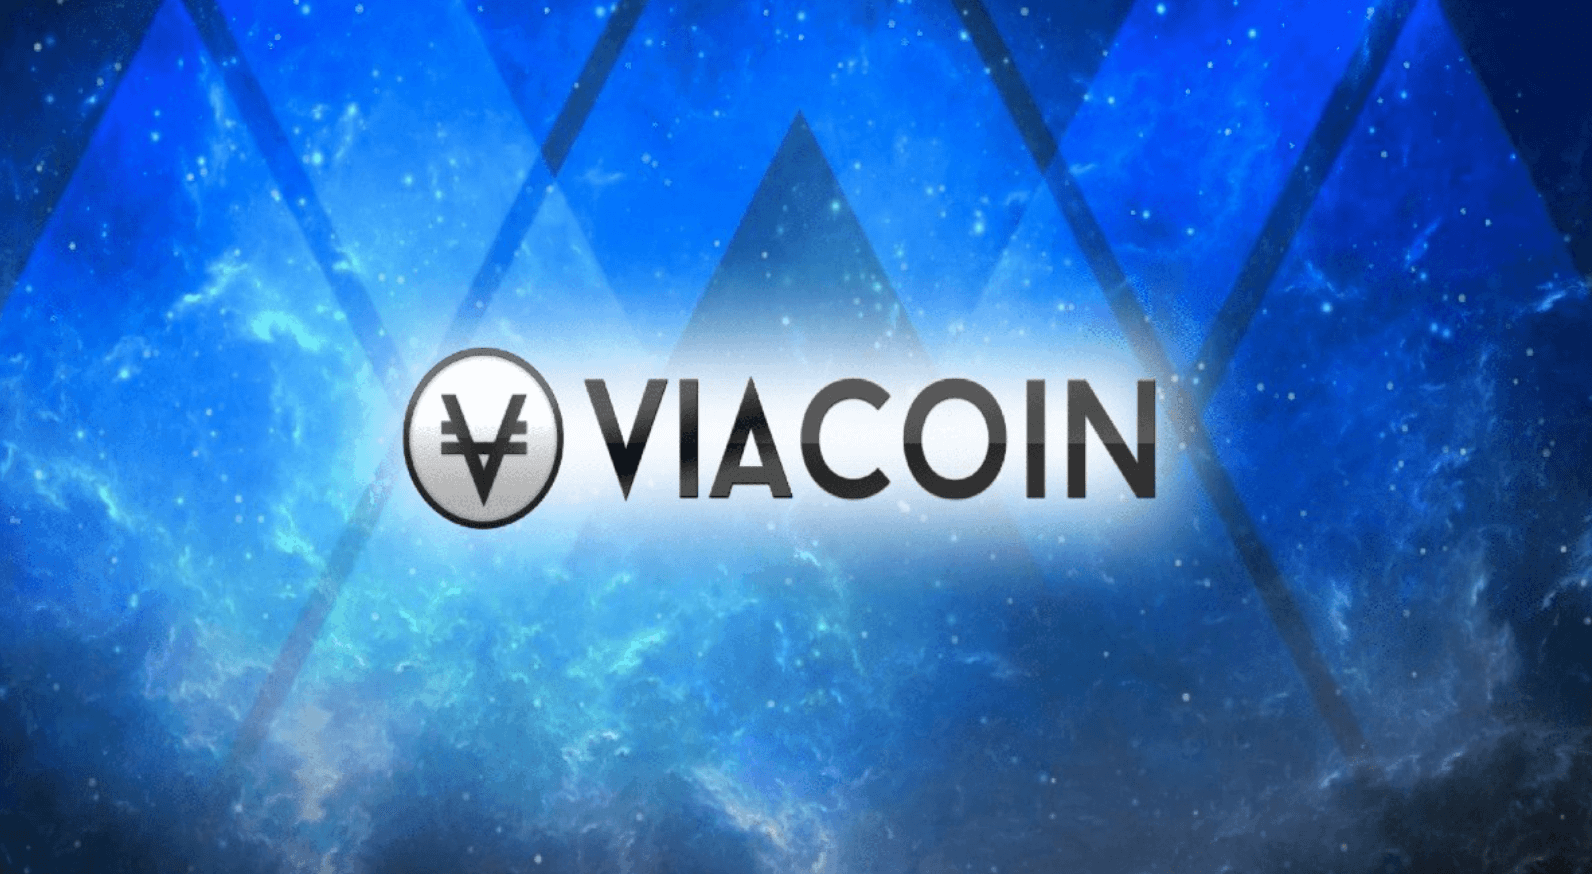 What is Viacoin Coin?